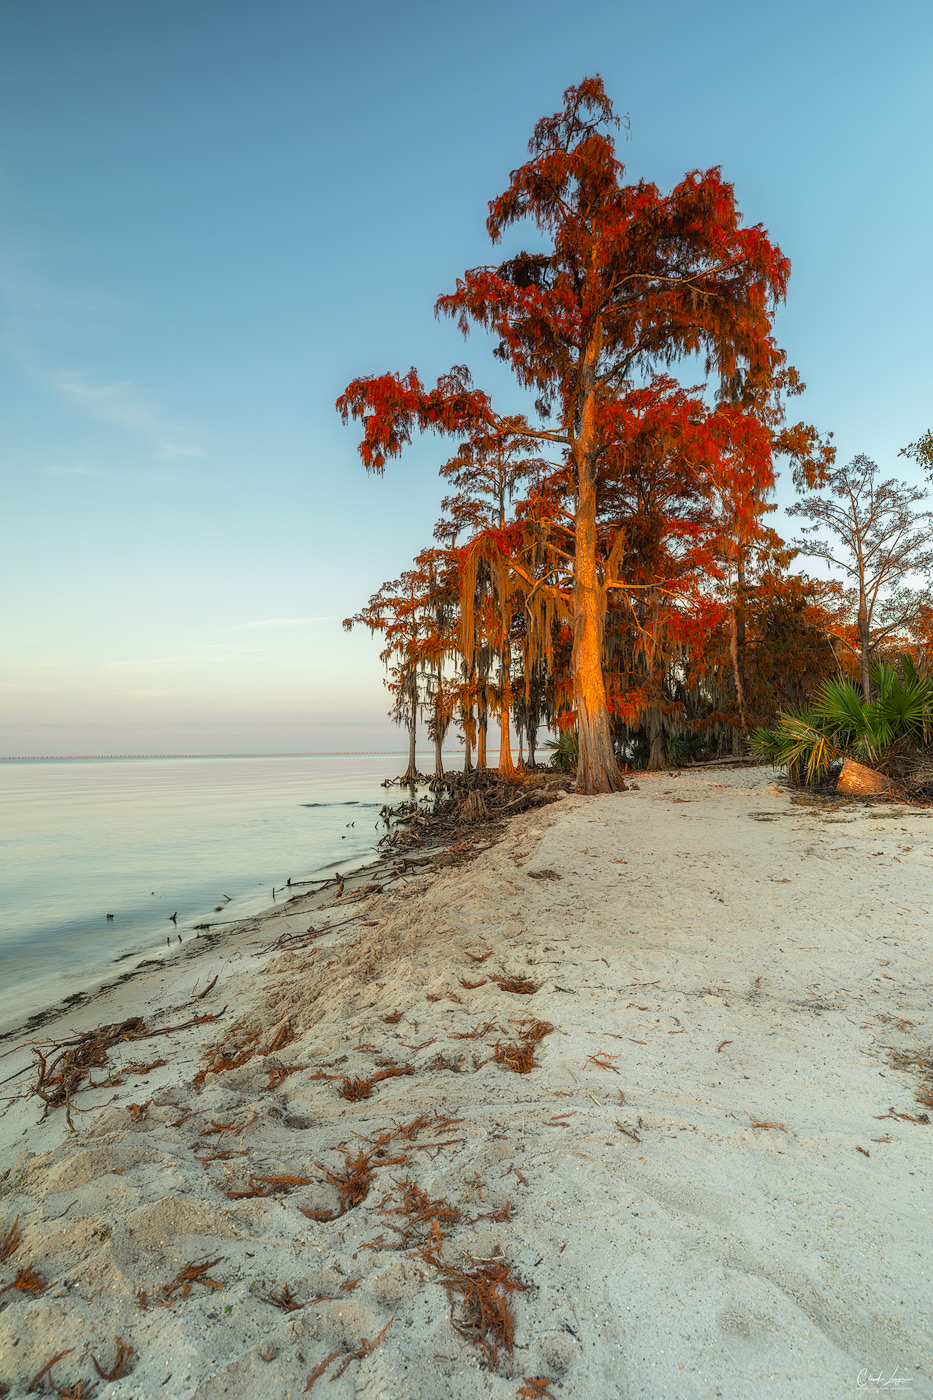 View of Cypress trees at sunrise at Fontainebleu State Park in Louisiana.